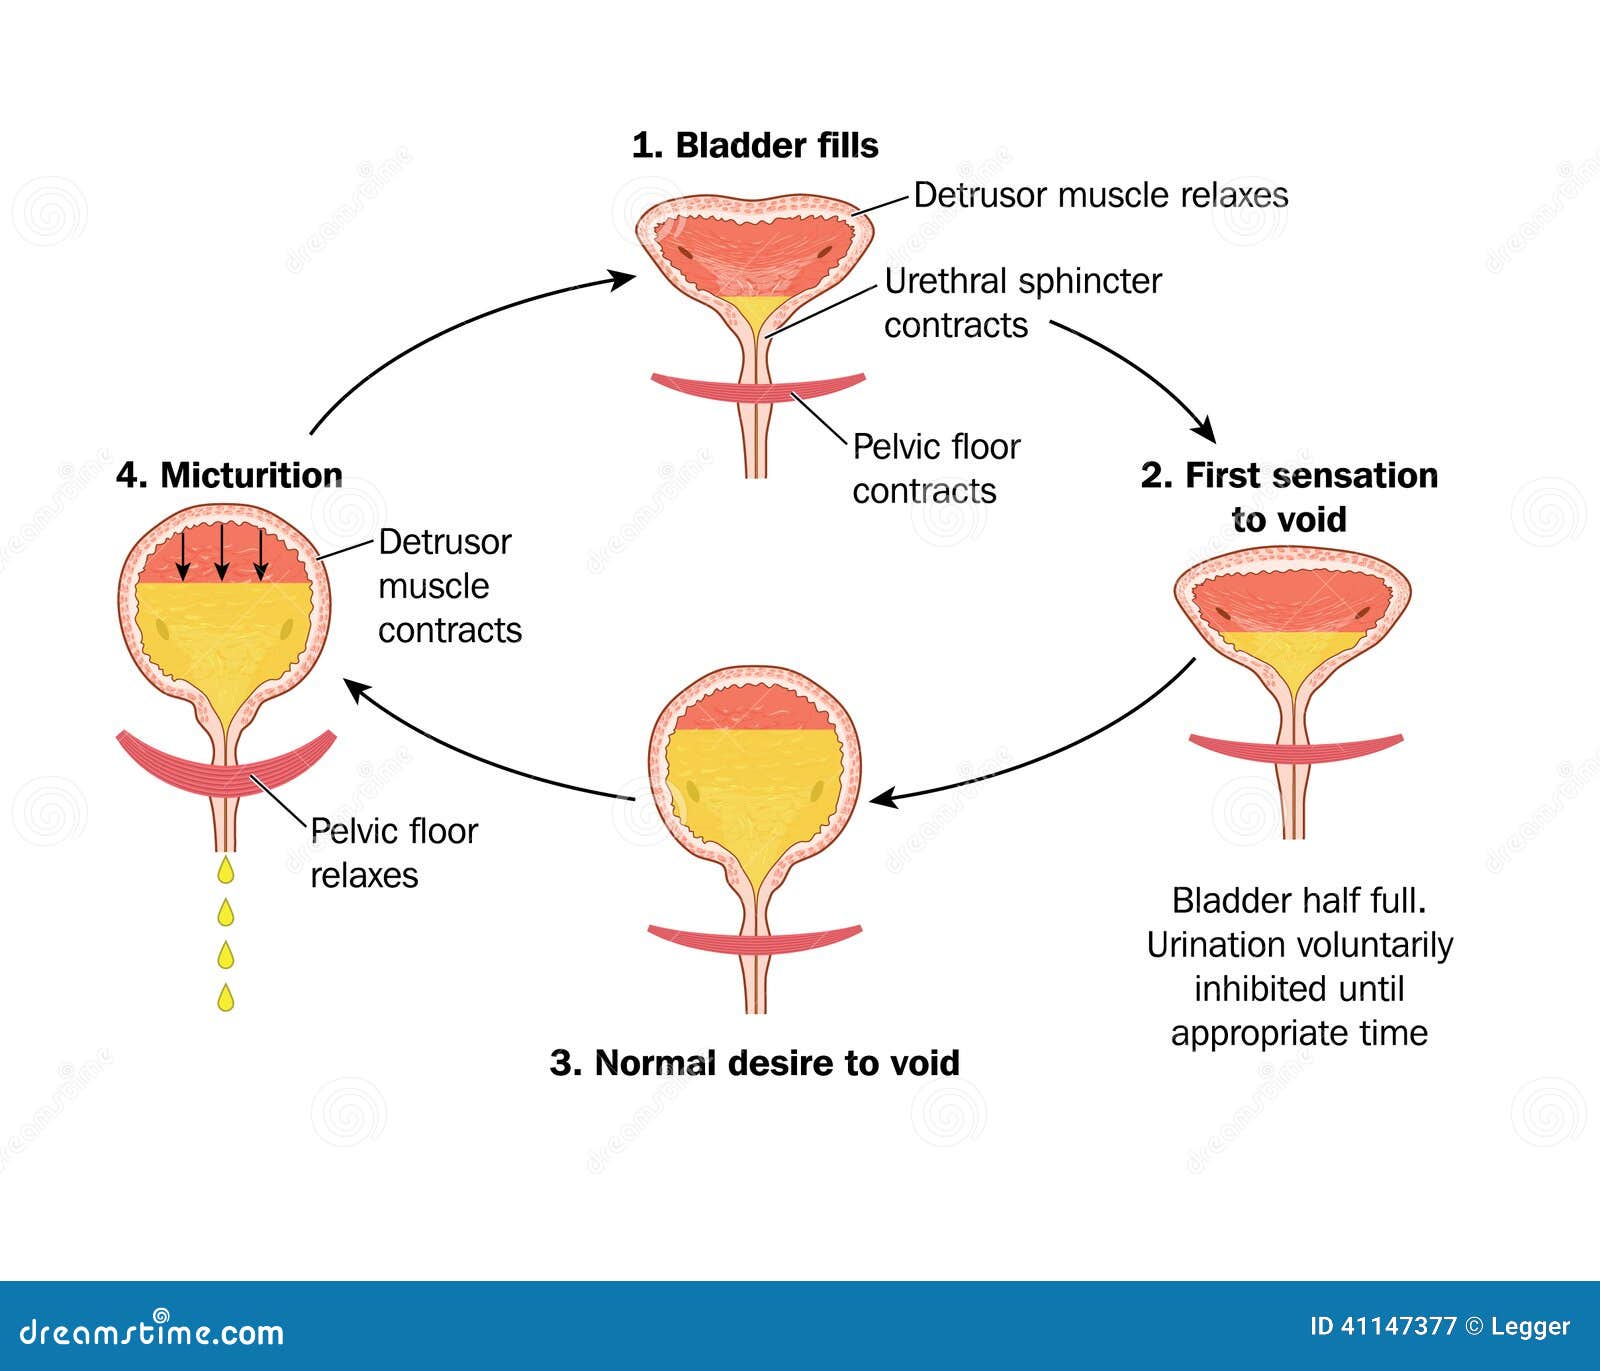 sequence of events in voiding the bladder